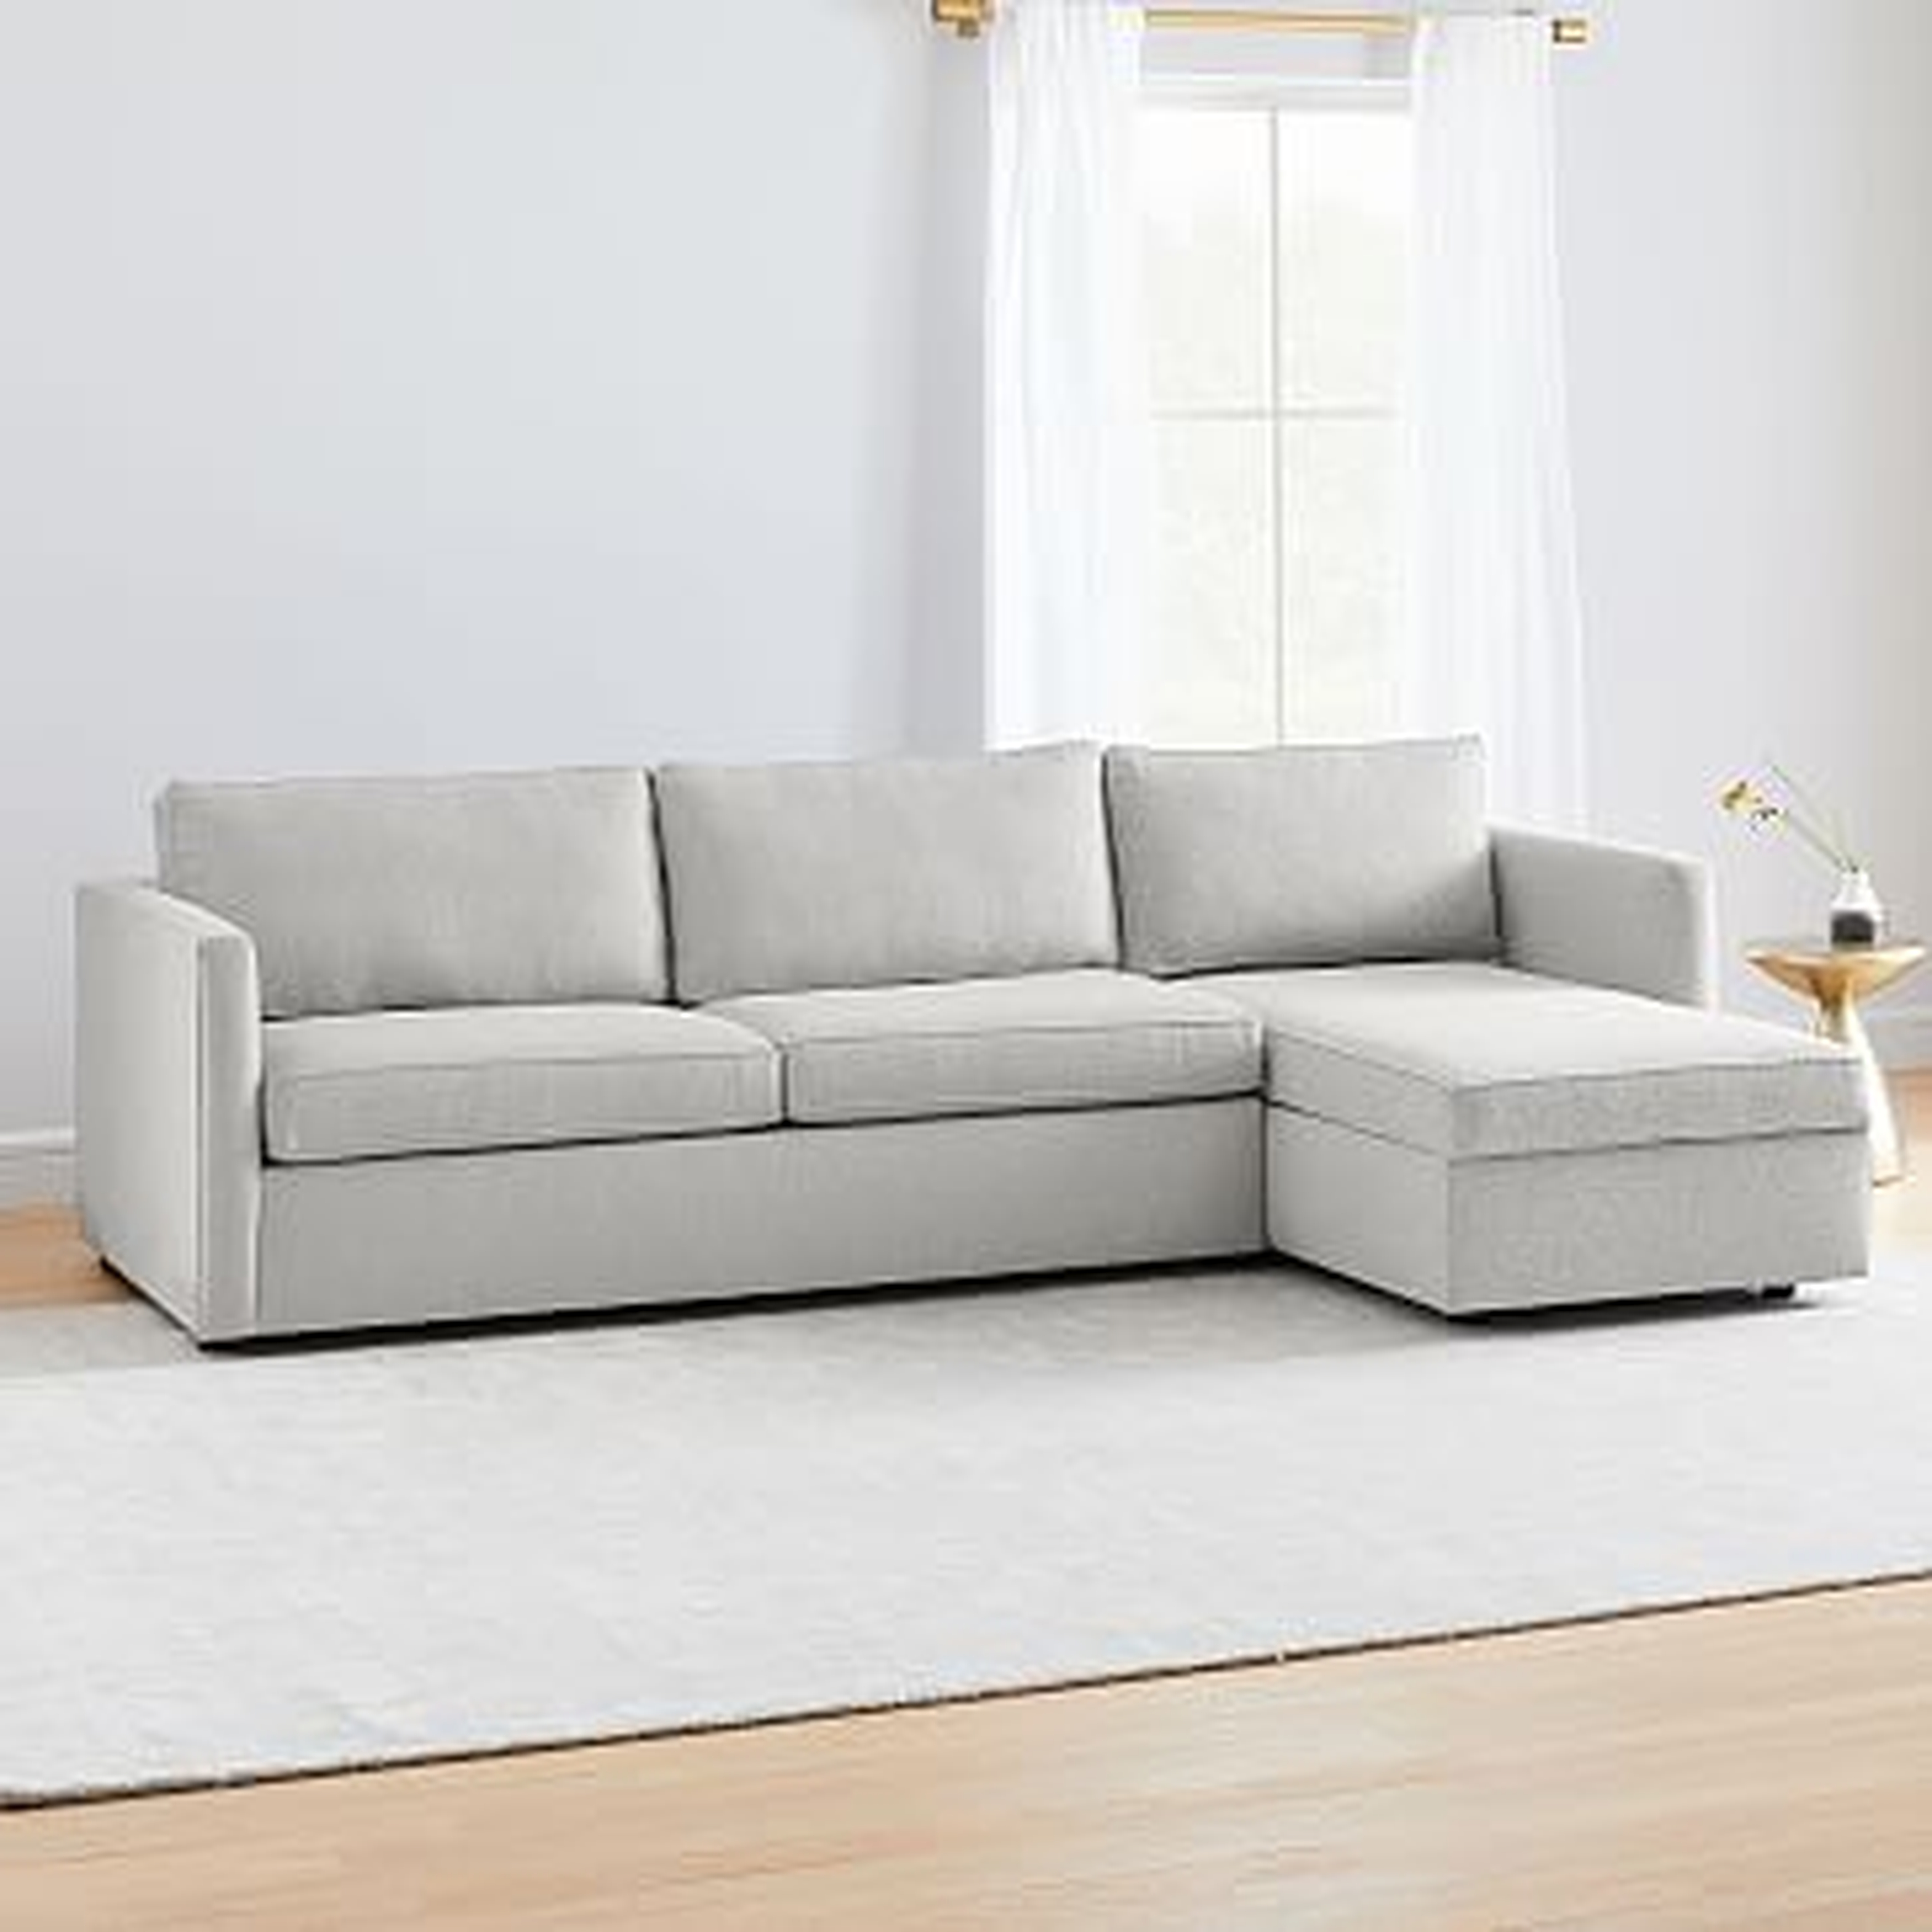 Harris Sectional Set 03: Left Arm Sleeper Sofa, Right Arm Storage Chaise, Poly, Chenille Tweed, Irongate, - West Elm